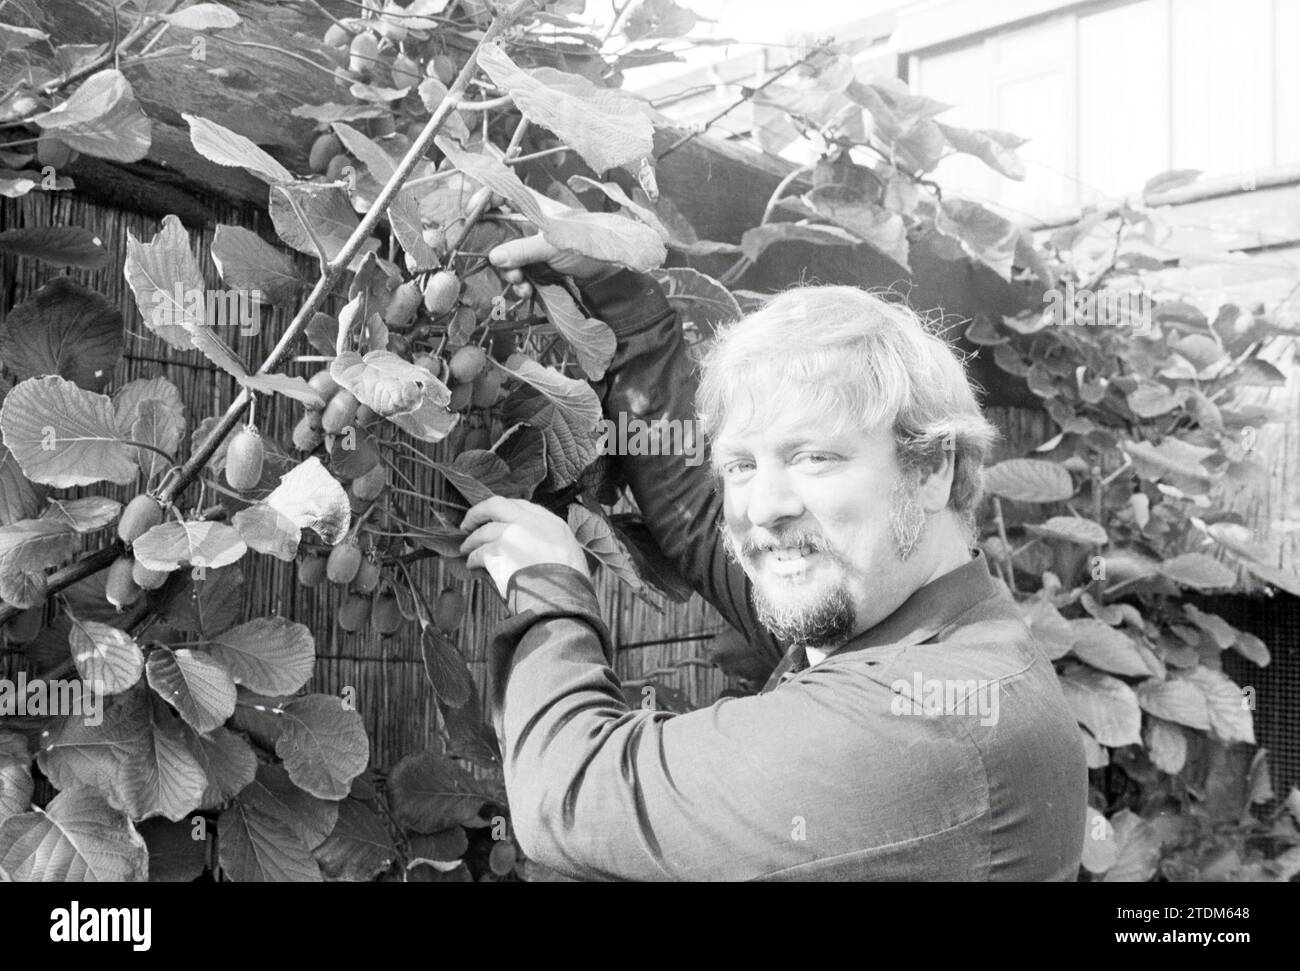 Mr Roosen with kiwi fruits on tree, Trees, Fruit, Persons, 18-09-1984, Whizgle News from the Past, Tailored for the Future. Explore historical narratives, Dutch The Netherlands agency image with a modern perspective, bridging the gap between yesterday's events and tomorrow's insights. A timeless journey shaping the stories that shape our future Stock Photo